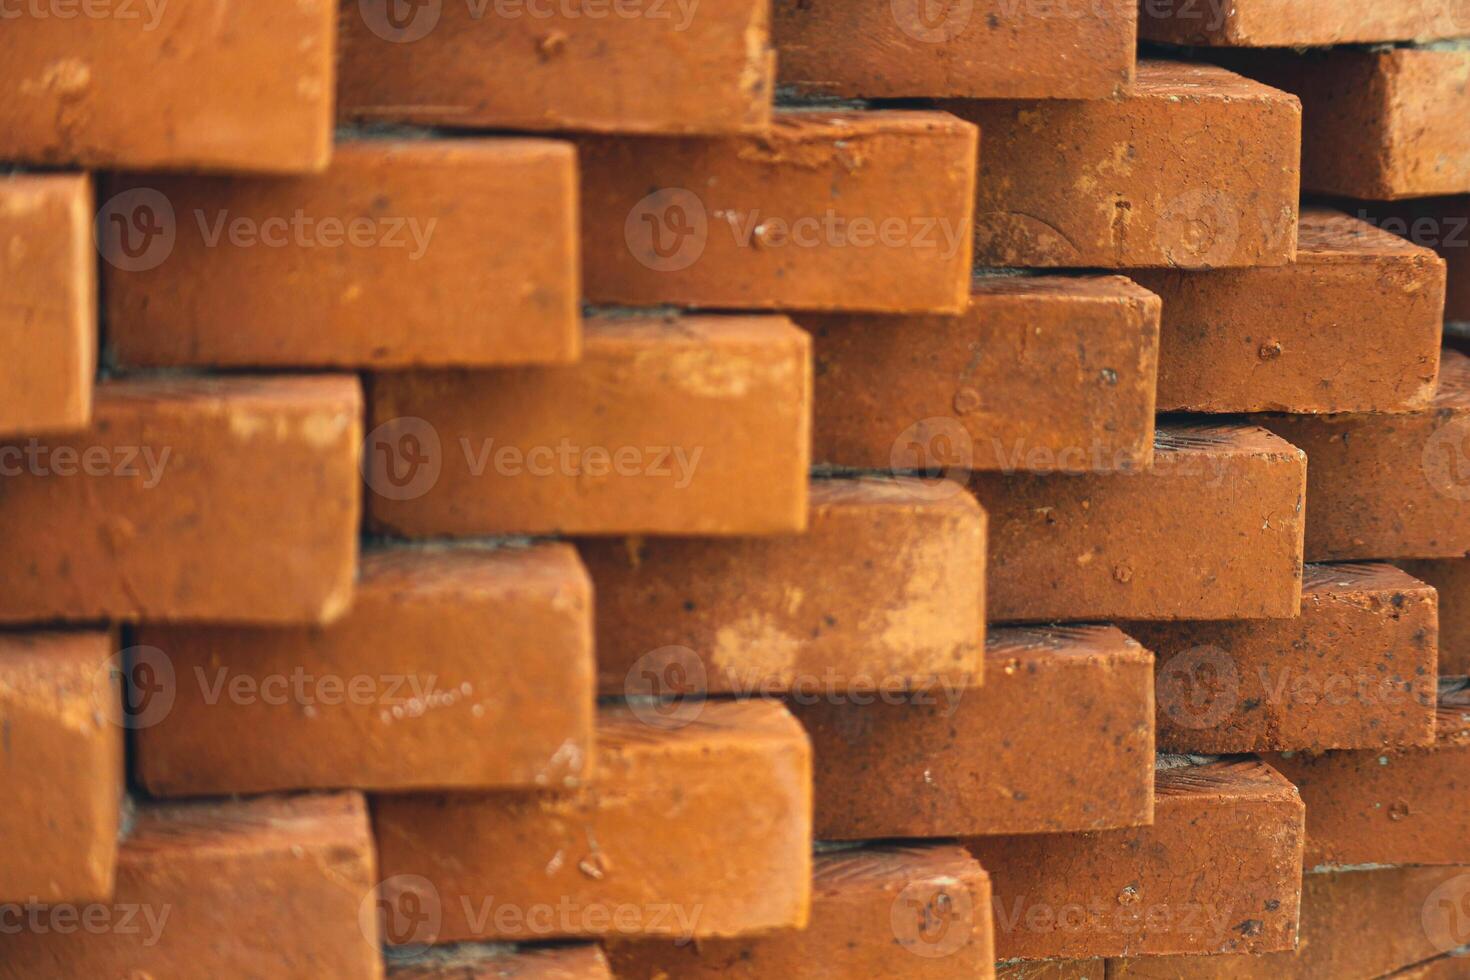 The arrangement of the bricks arranged in such a way forms a very beautiful building wall photo